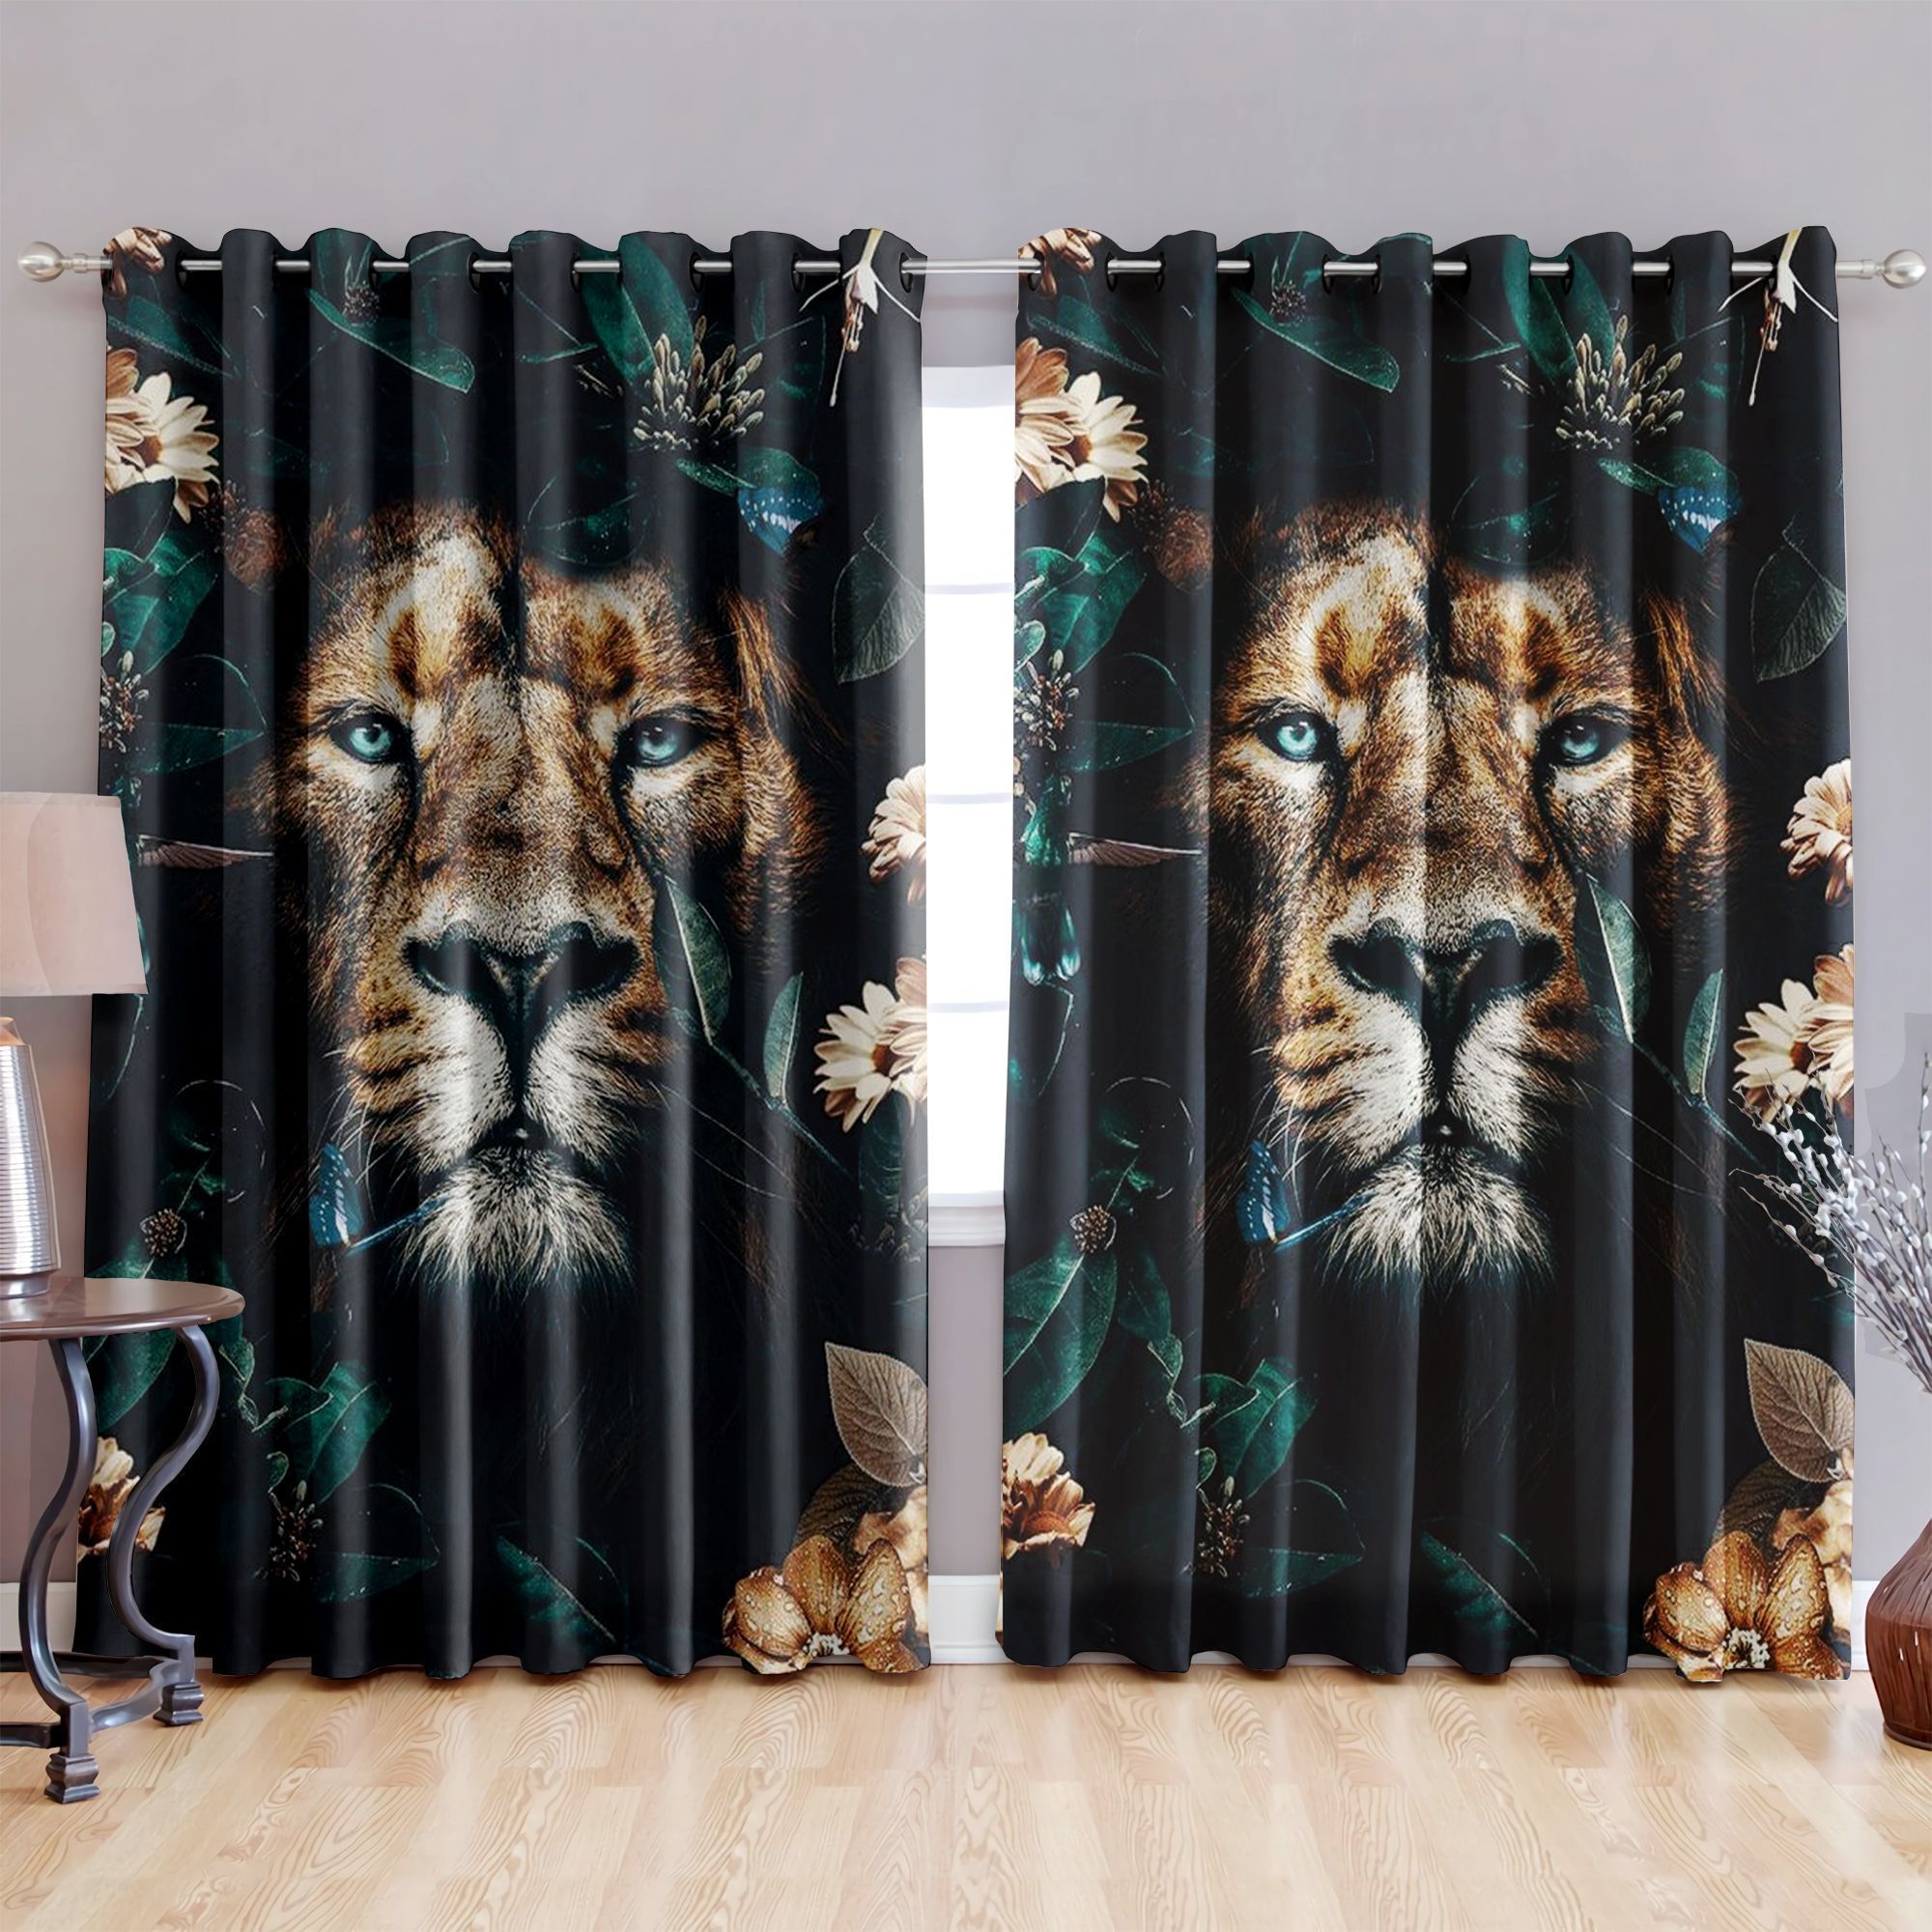 Lion Face In The Darkness Printed Window Curtain Home Decor